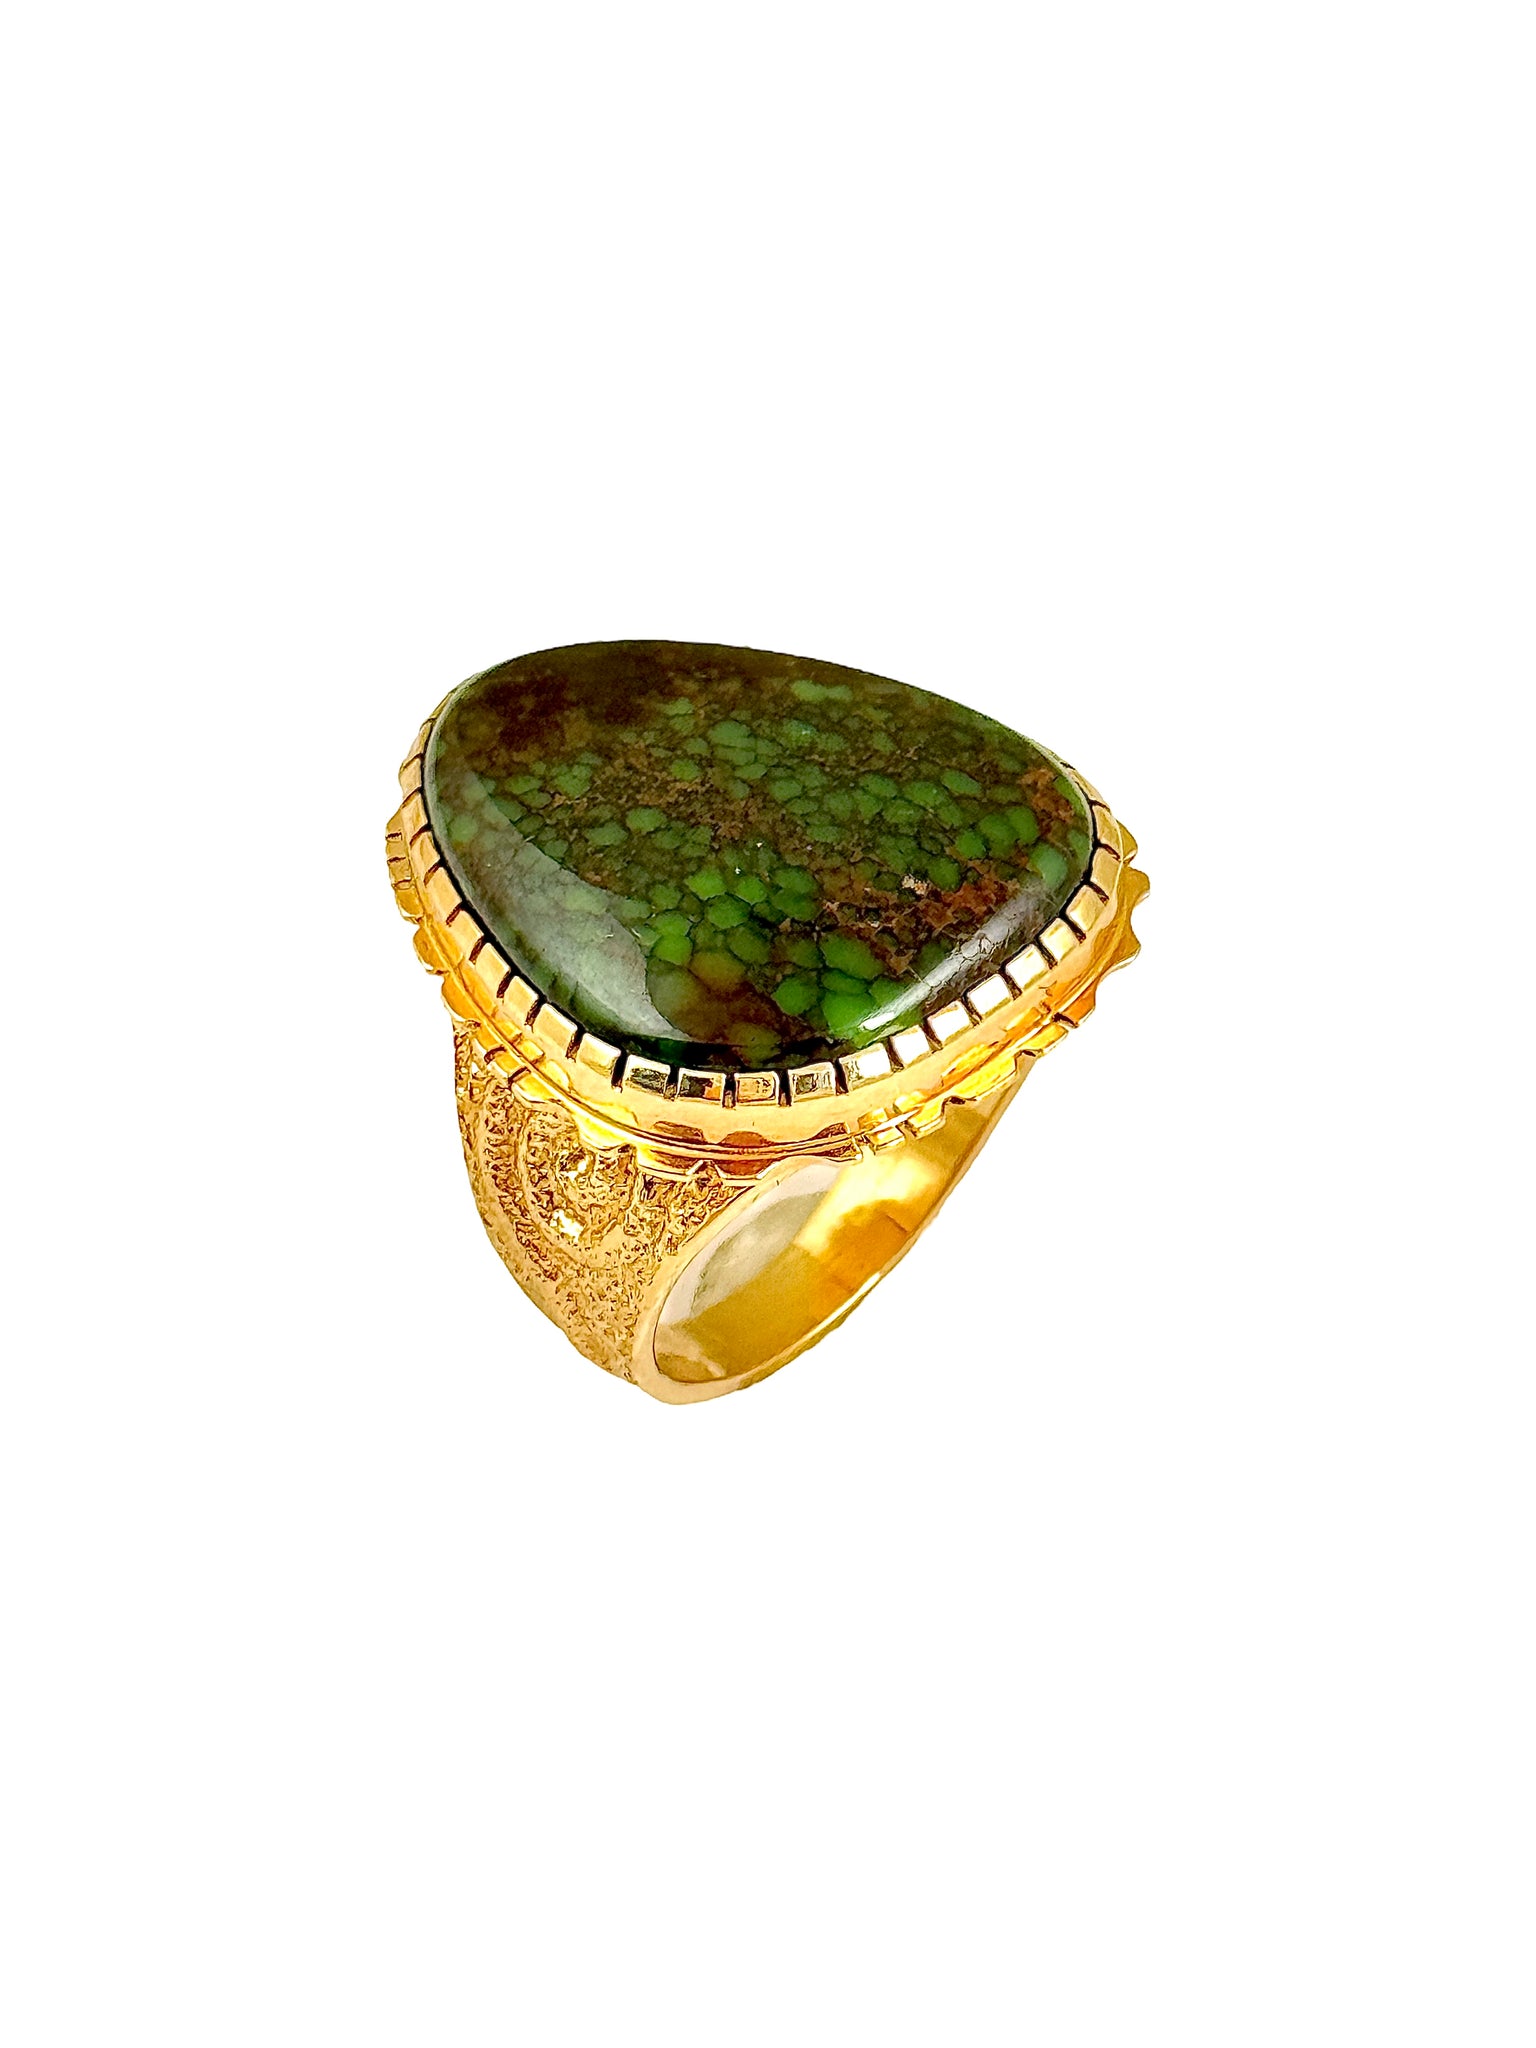 Ric Charlie Gold Turquoise Ring